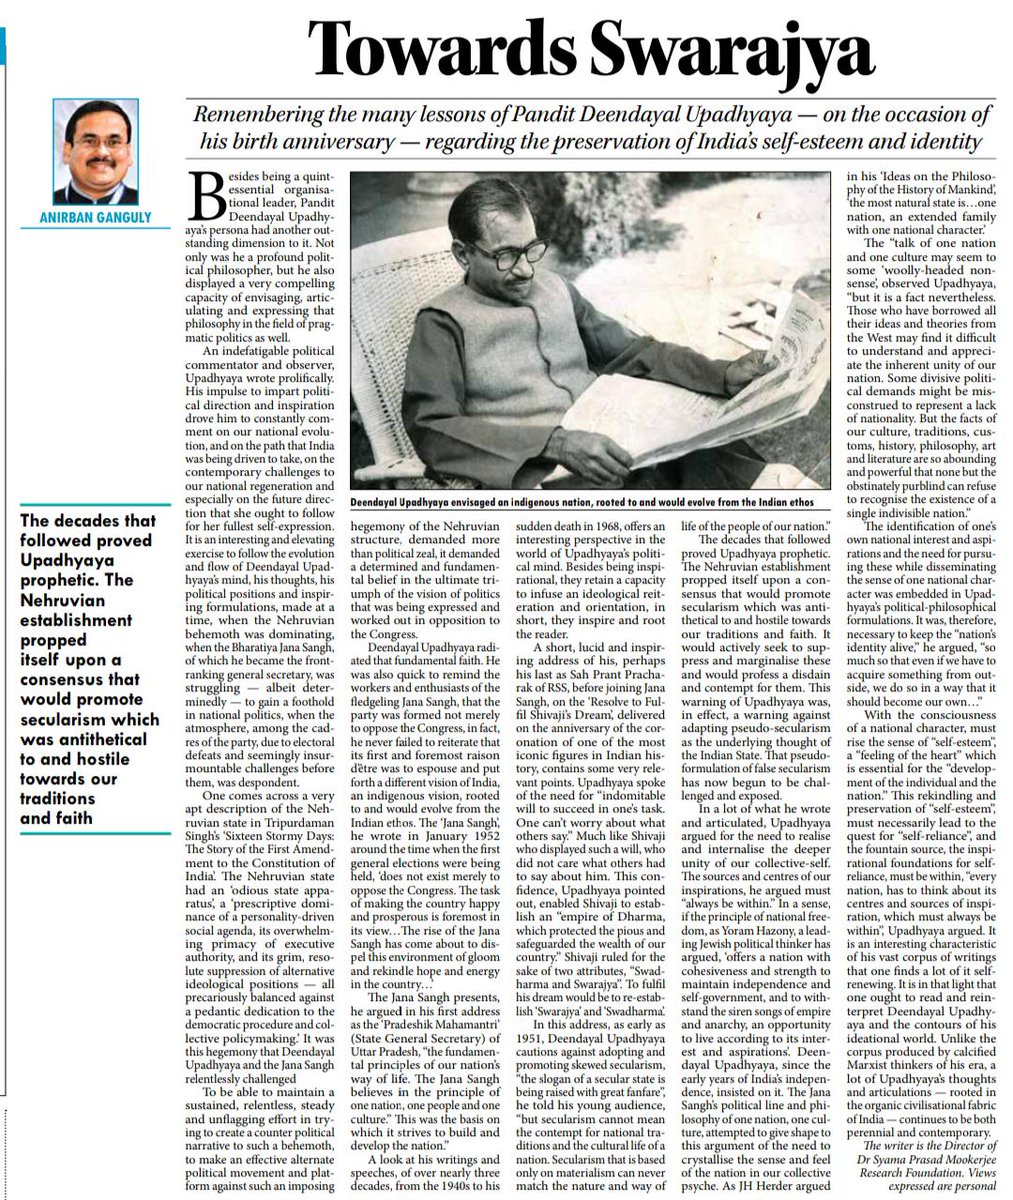 "The facts of our culture, traditions, customs, history, philosophy, art & literature are so abounding & powerful that none but the obstinately purblind can refuse to recognise the existence of a single indivisible nation." Homage Pt  #DeenDayalUpadhyay http://www.millenniumpost.in/opinion/towards-swarajya-419213